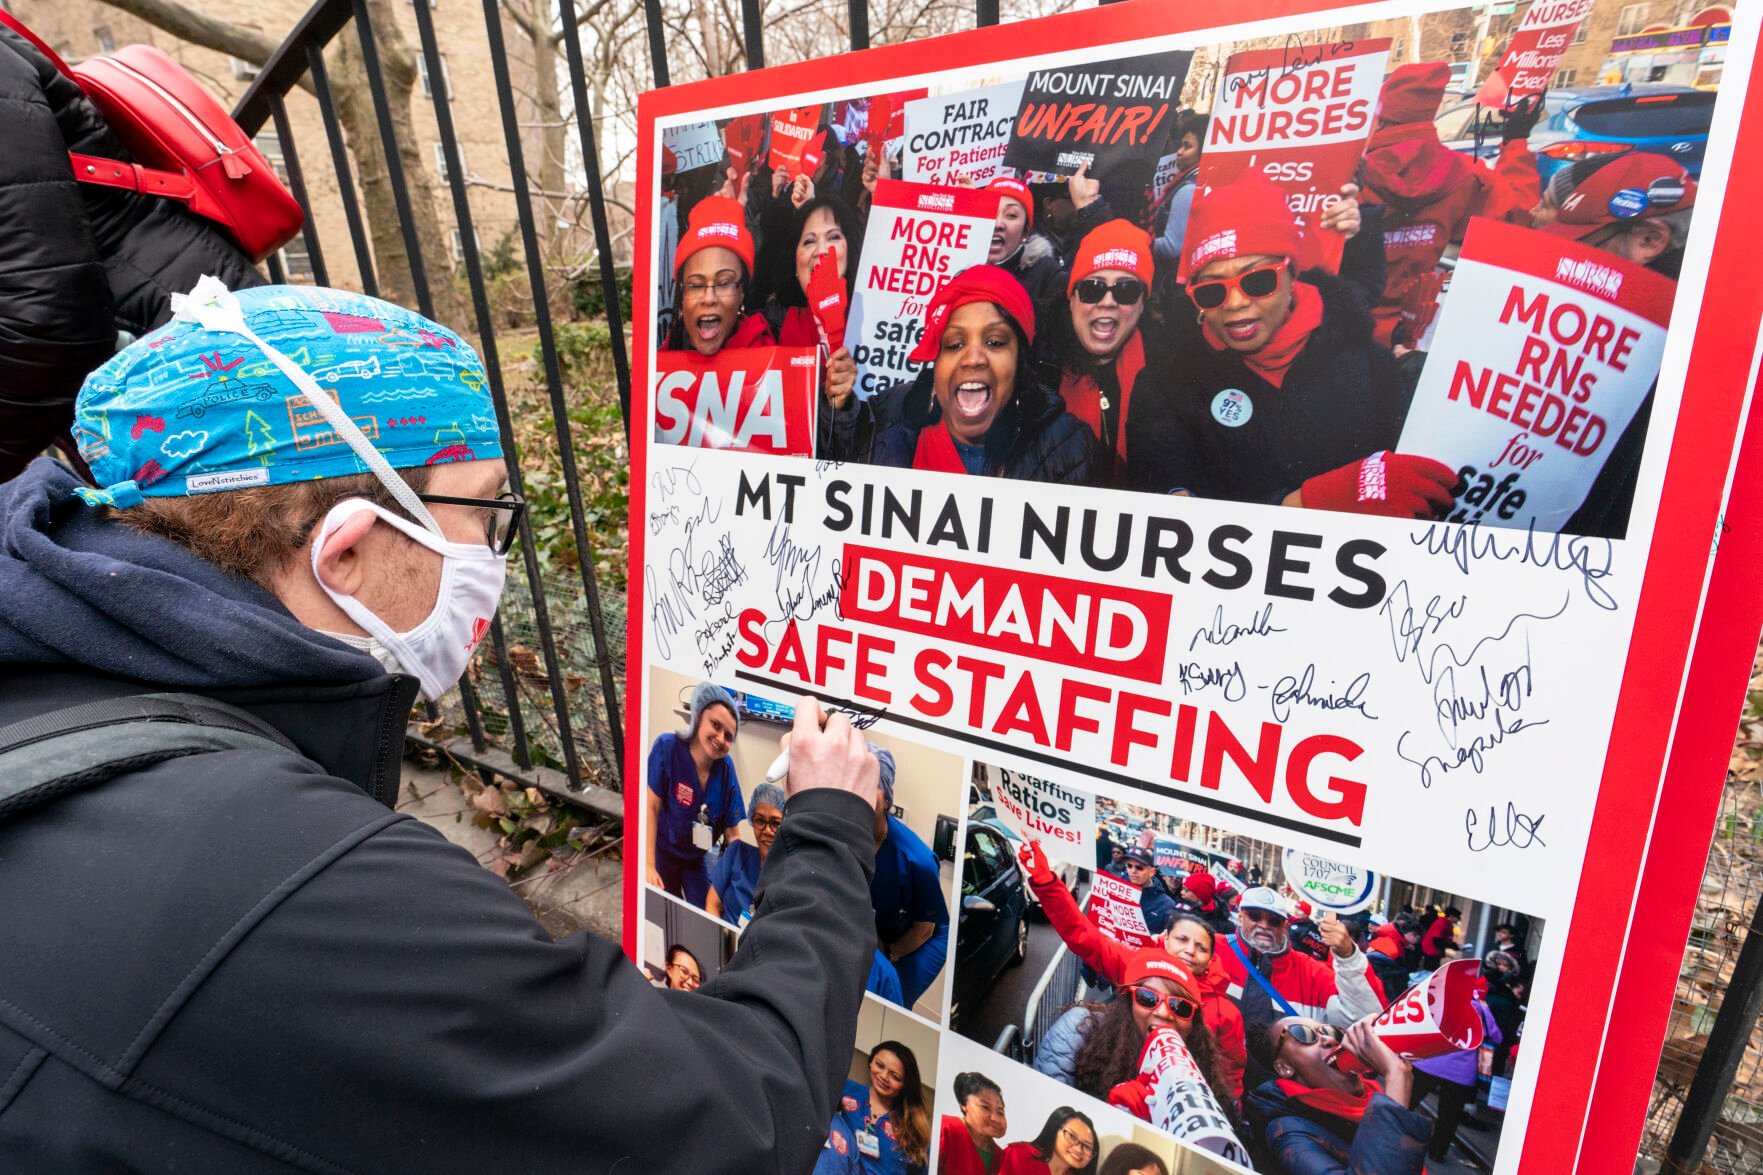 <p>FILE - Zach Clapp, a nurse in the Pediatric Cardiac ICU at Mount Sinai Hospital, signs a board demanding safe staffing during a rally by NYSNA nurses from NY Presbyterian and Mount Sinai, March 16, 2021, in New York. With a strike deadline looming, contract negotiations continued Sunday, Jan. 8, 2023, between three New York City hospitals and the union representing nearly 9,000 nurses prepared to walk out on Monday, Jan. 9, union officials said. (AP Photo/Mary Altaffer, File)</p>   PHOTO CREDIT: Mary Altaffer 